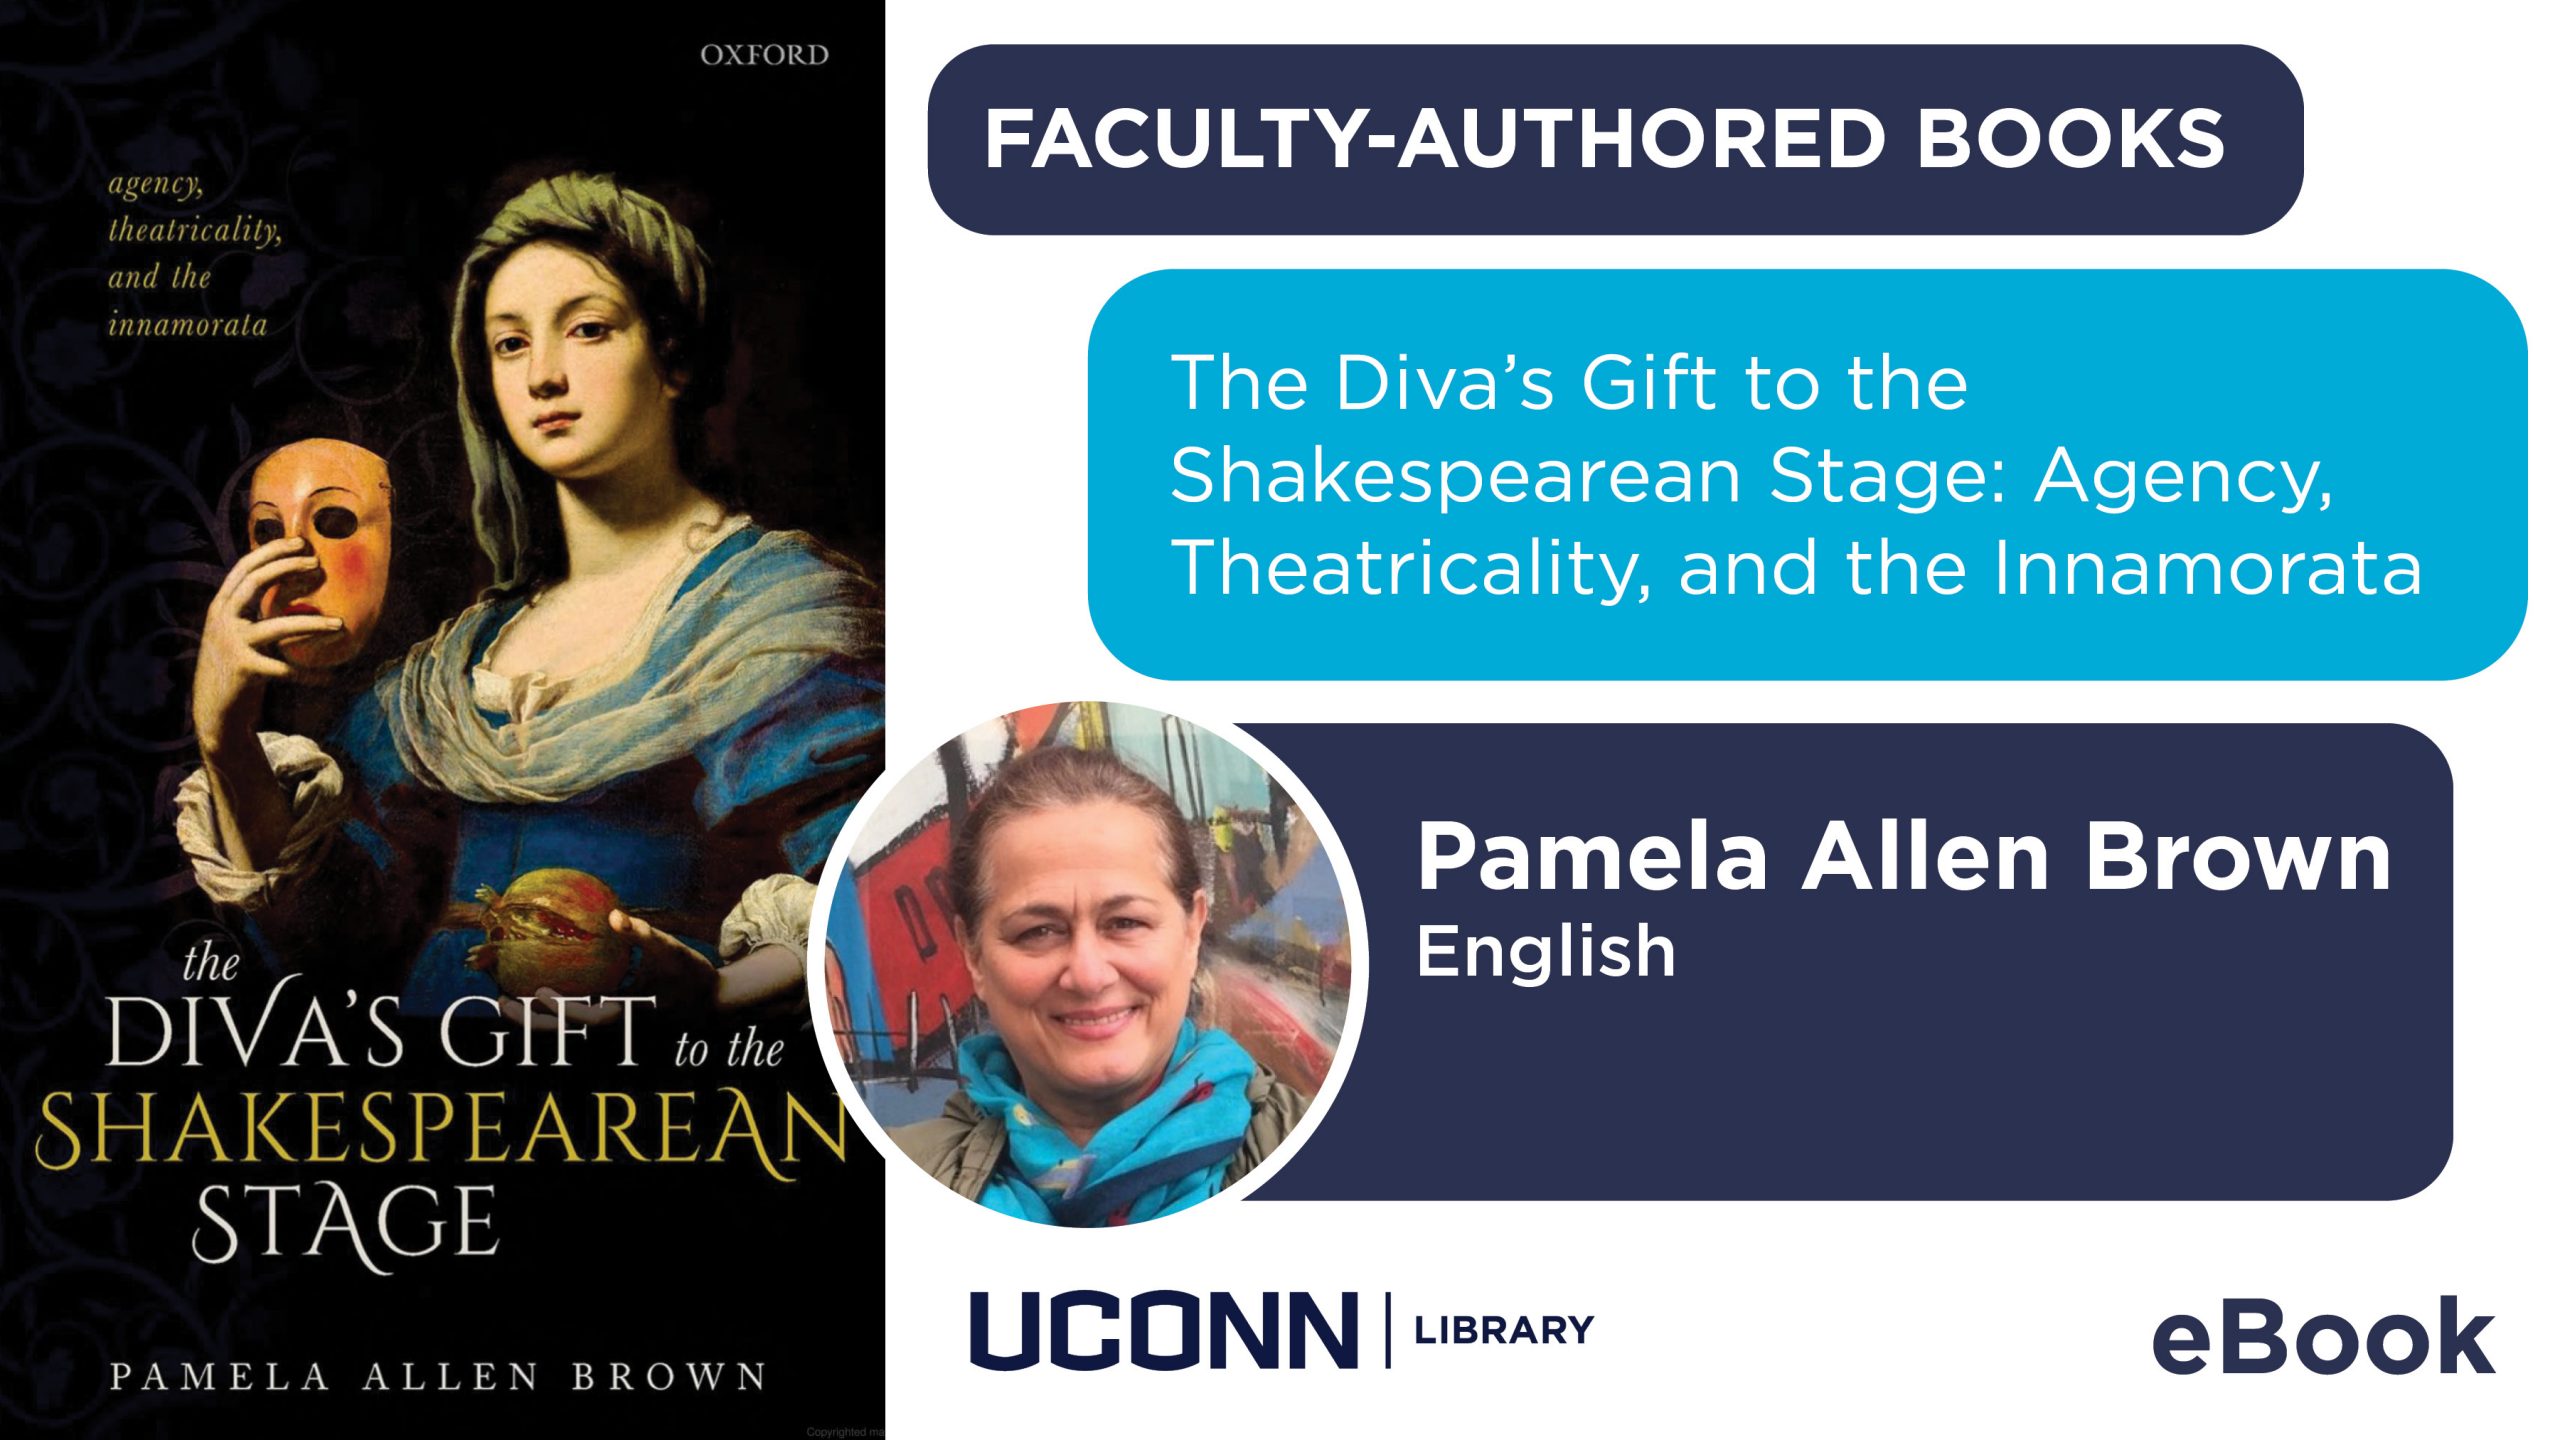 Marketing screen with various shades of blue text bubbles featuring faculty member, image of their book cover, and the text, “The Diva’s Gift to the Shakespearean Stage: Agency, Theatricality, and the Innamorata. Pamela Allen Brown. English. UConn Library. eBook.” https://search.lib.uconn.edu/permalink/01UCT_STORRS/okmb0h/alma99425254843502432 